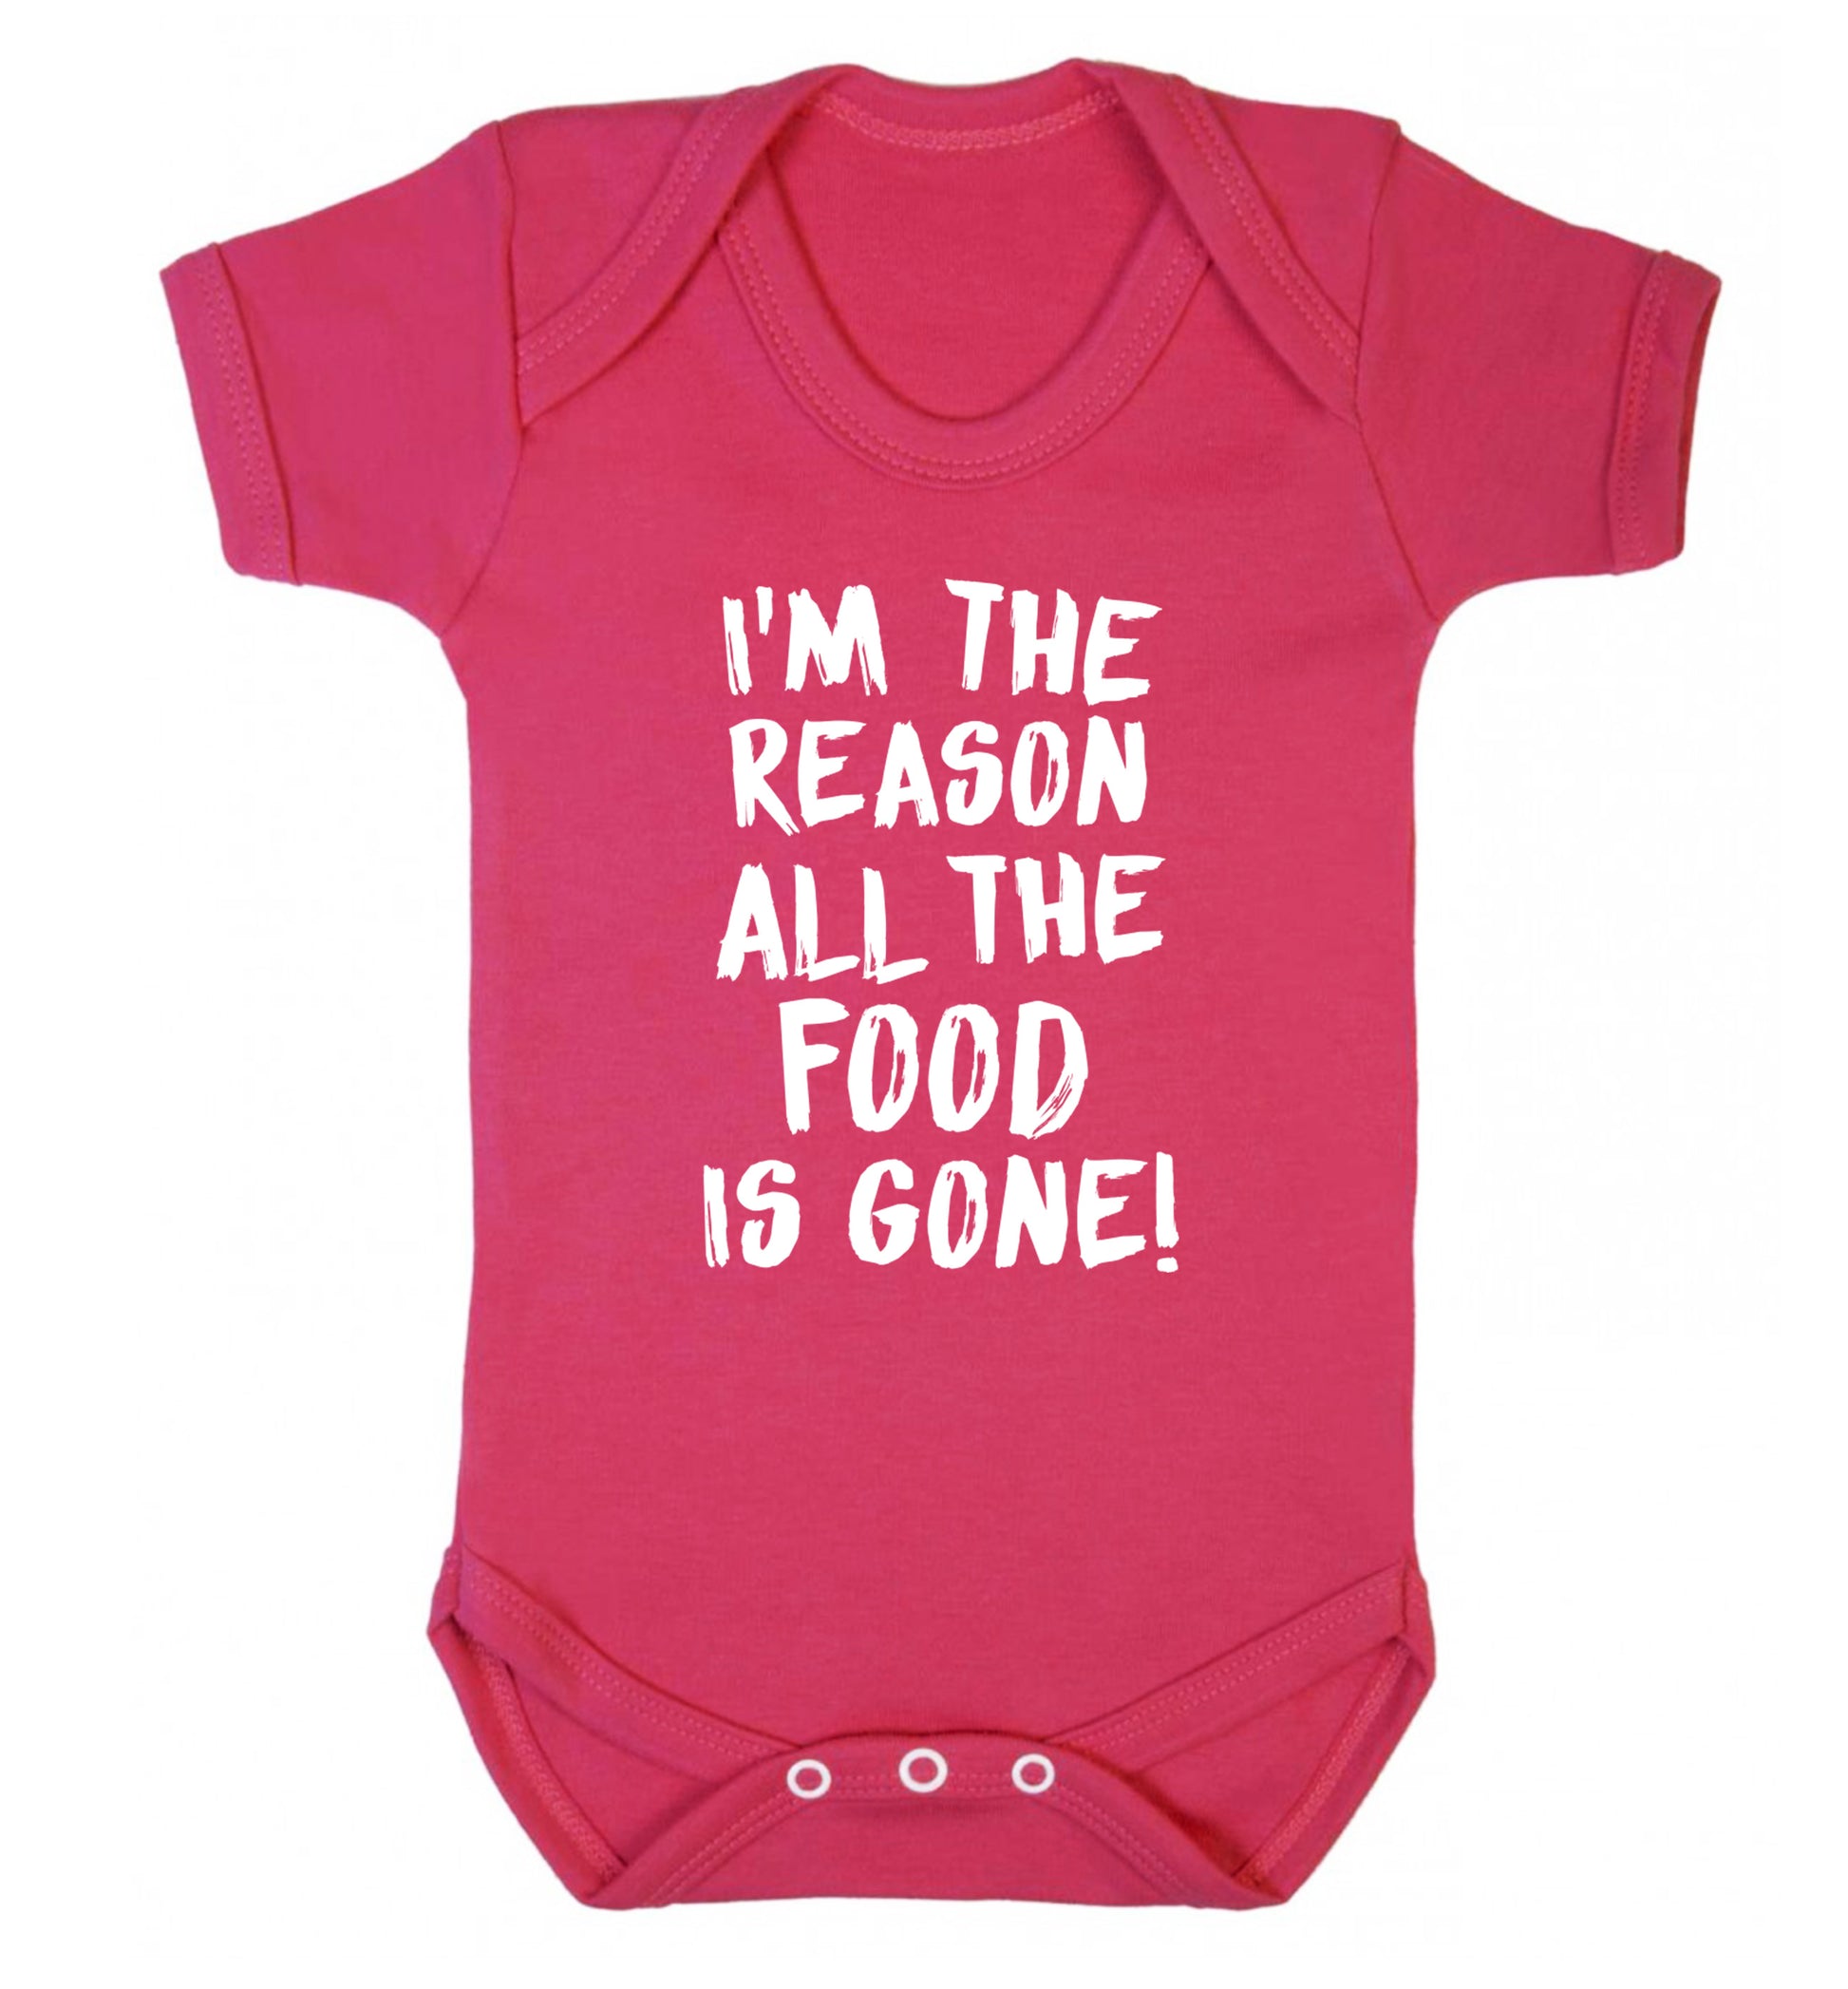 I'm the reason why all the food is gone Baby Vest dark pink 18-24 months